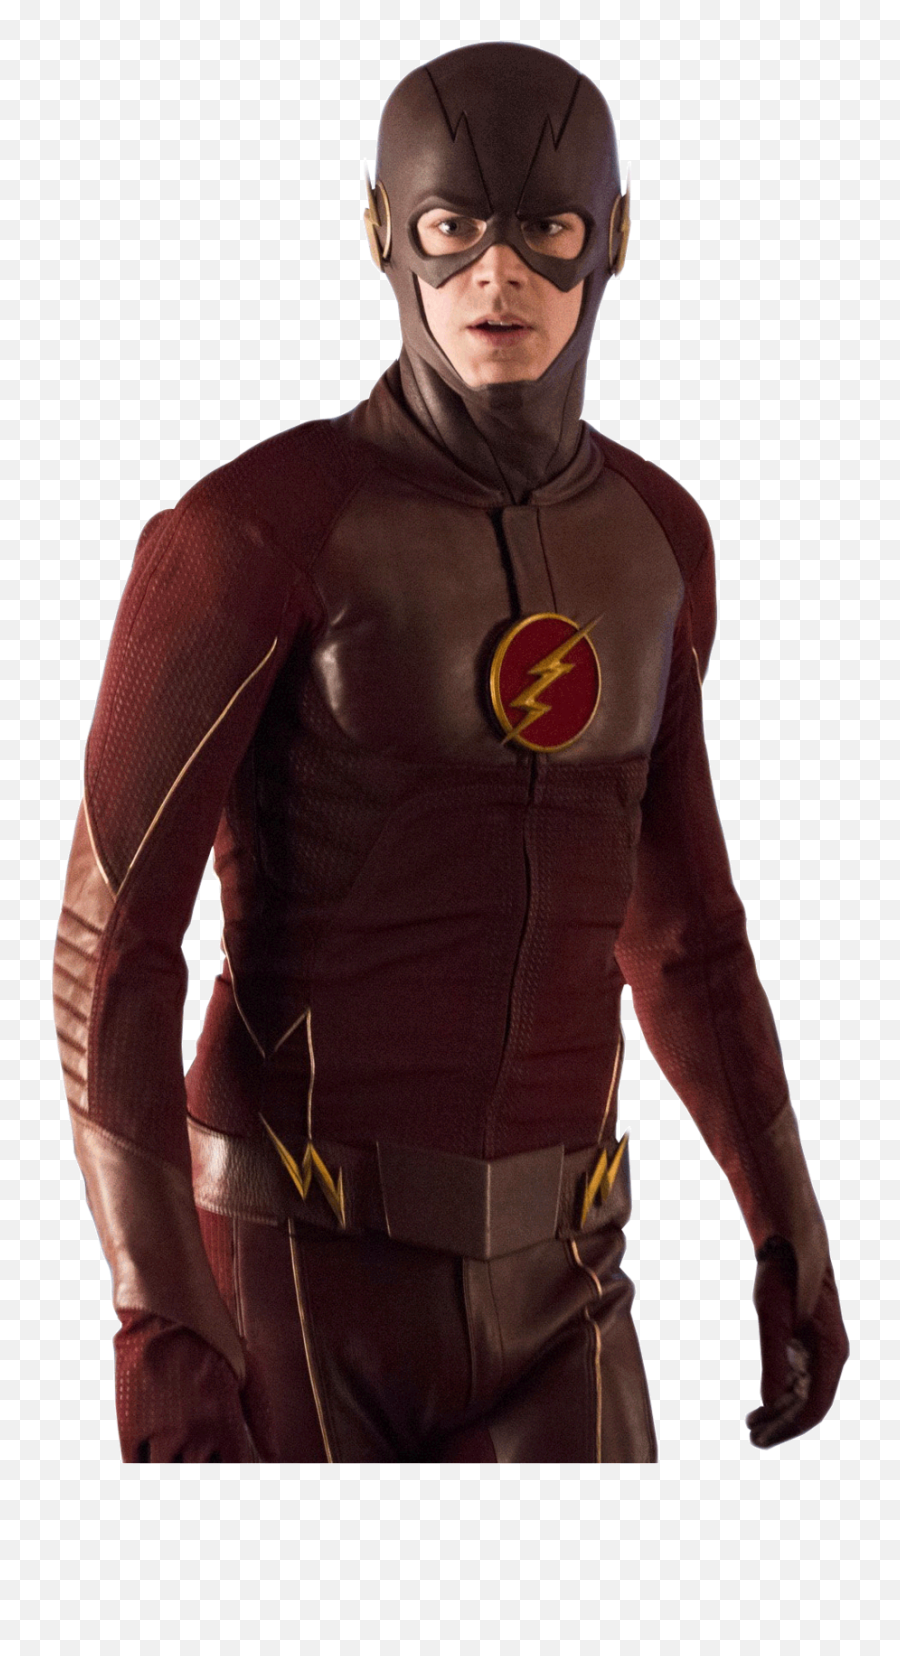 The Flash Png Images - Flash Png Hd,Flash Transparent